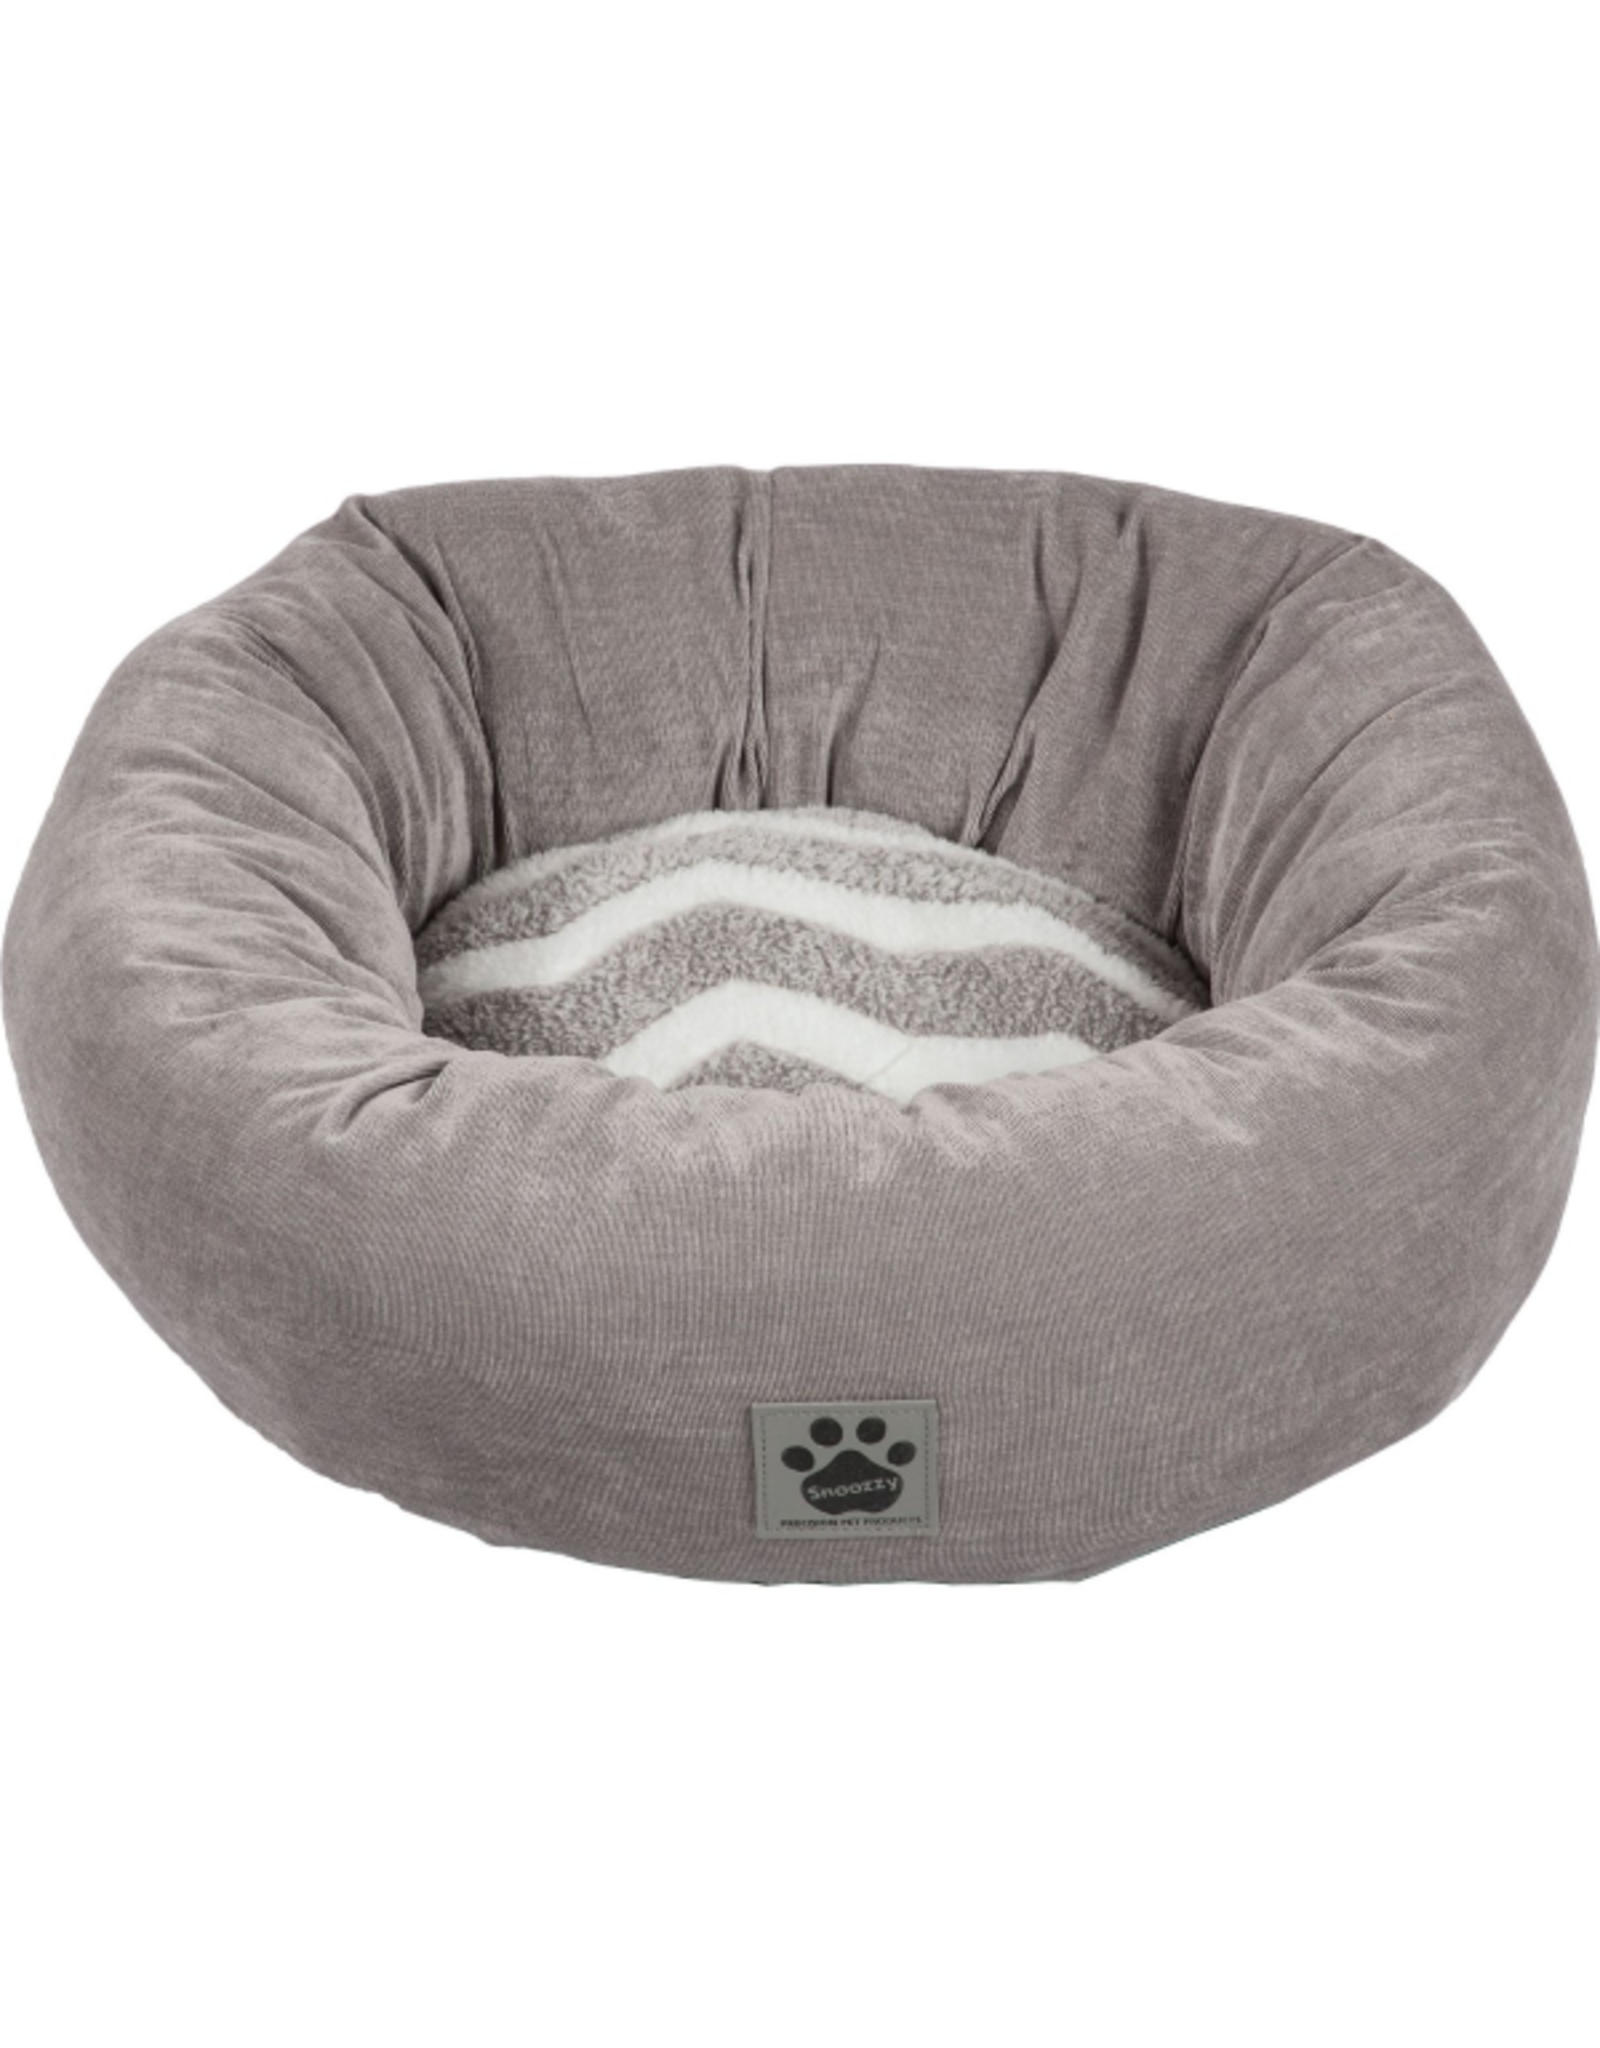 SnooZZy Rustic Zigzag Donut Bed Gry/Wh Zigzag Gry Cord 17 in